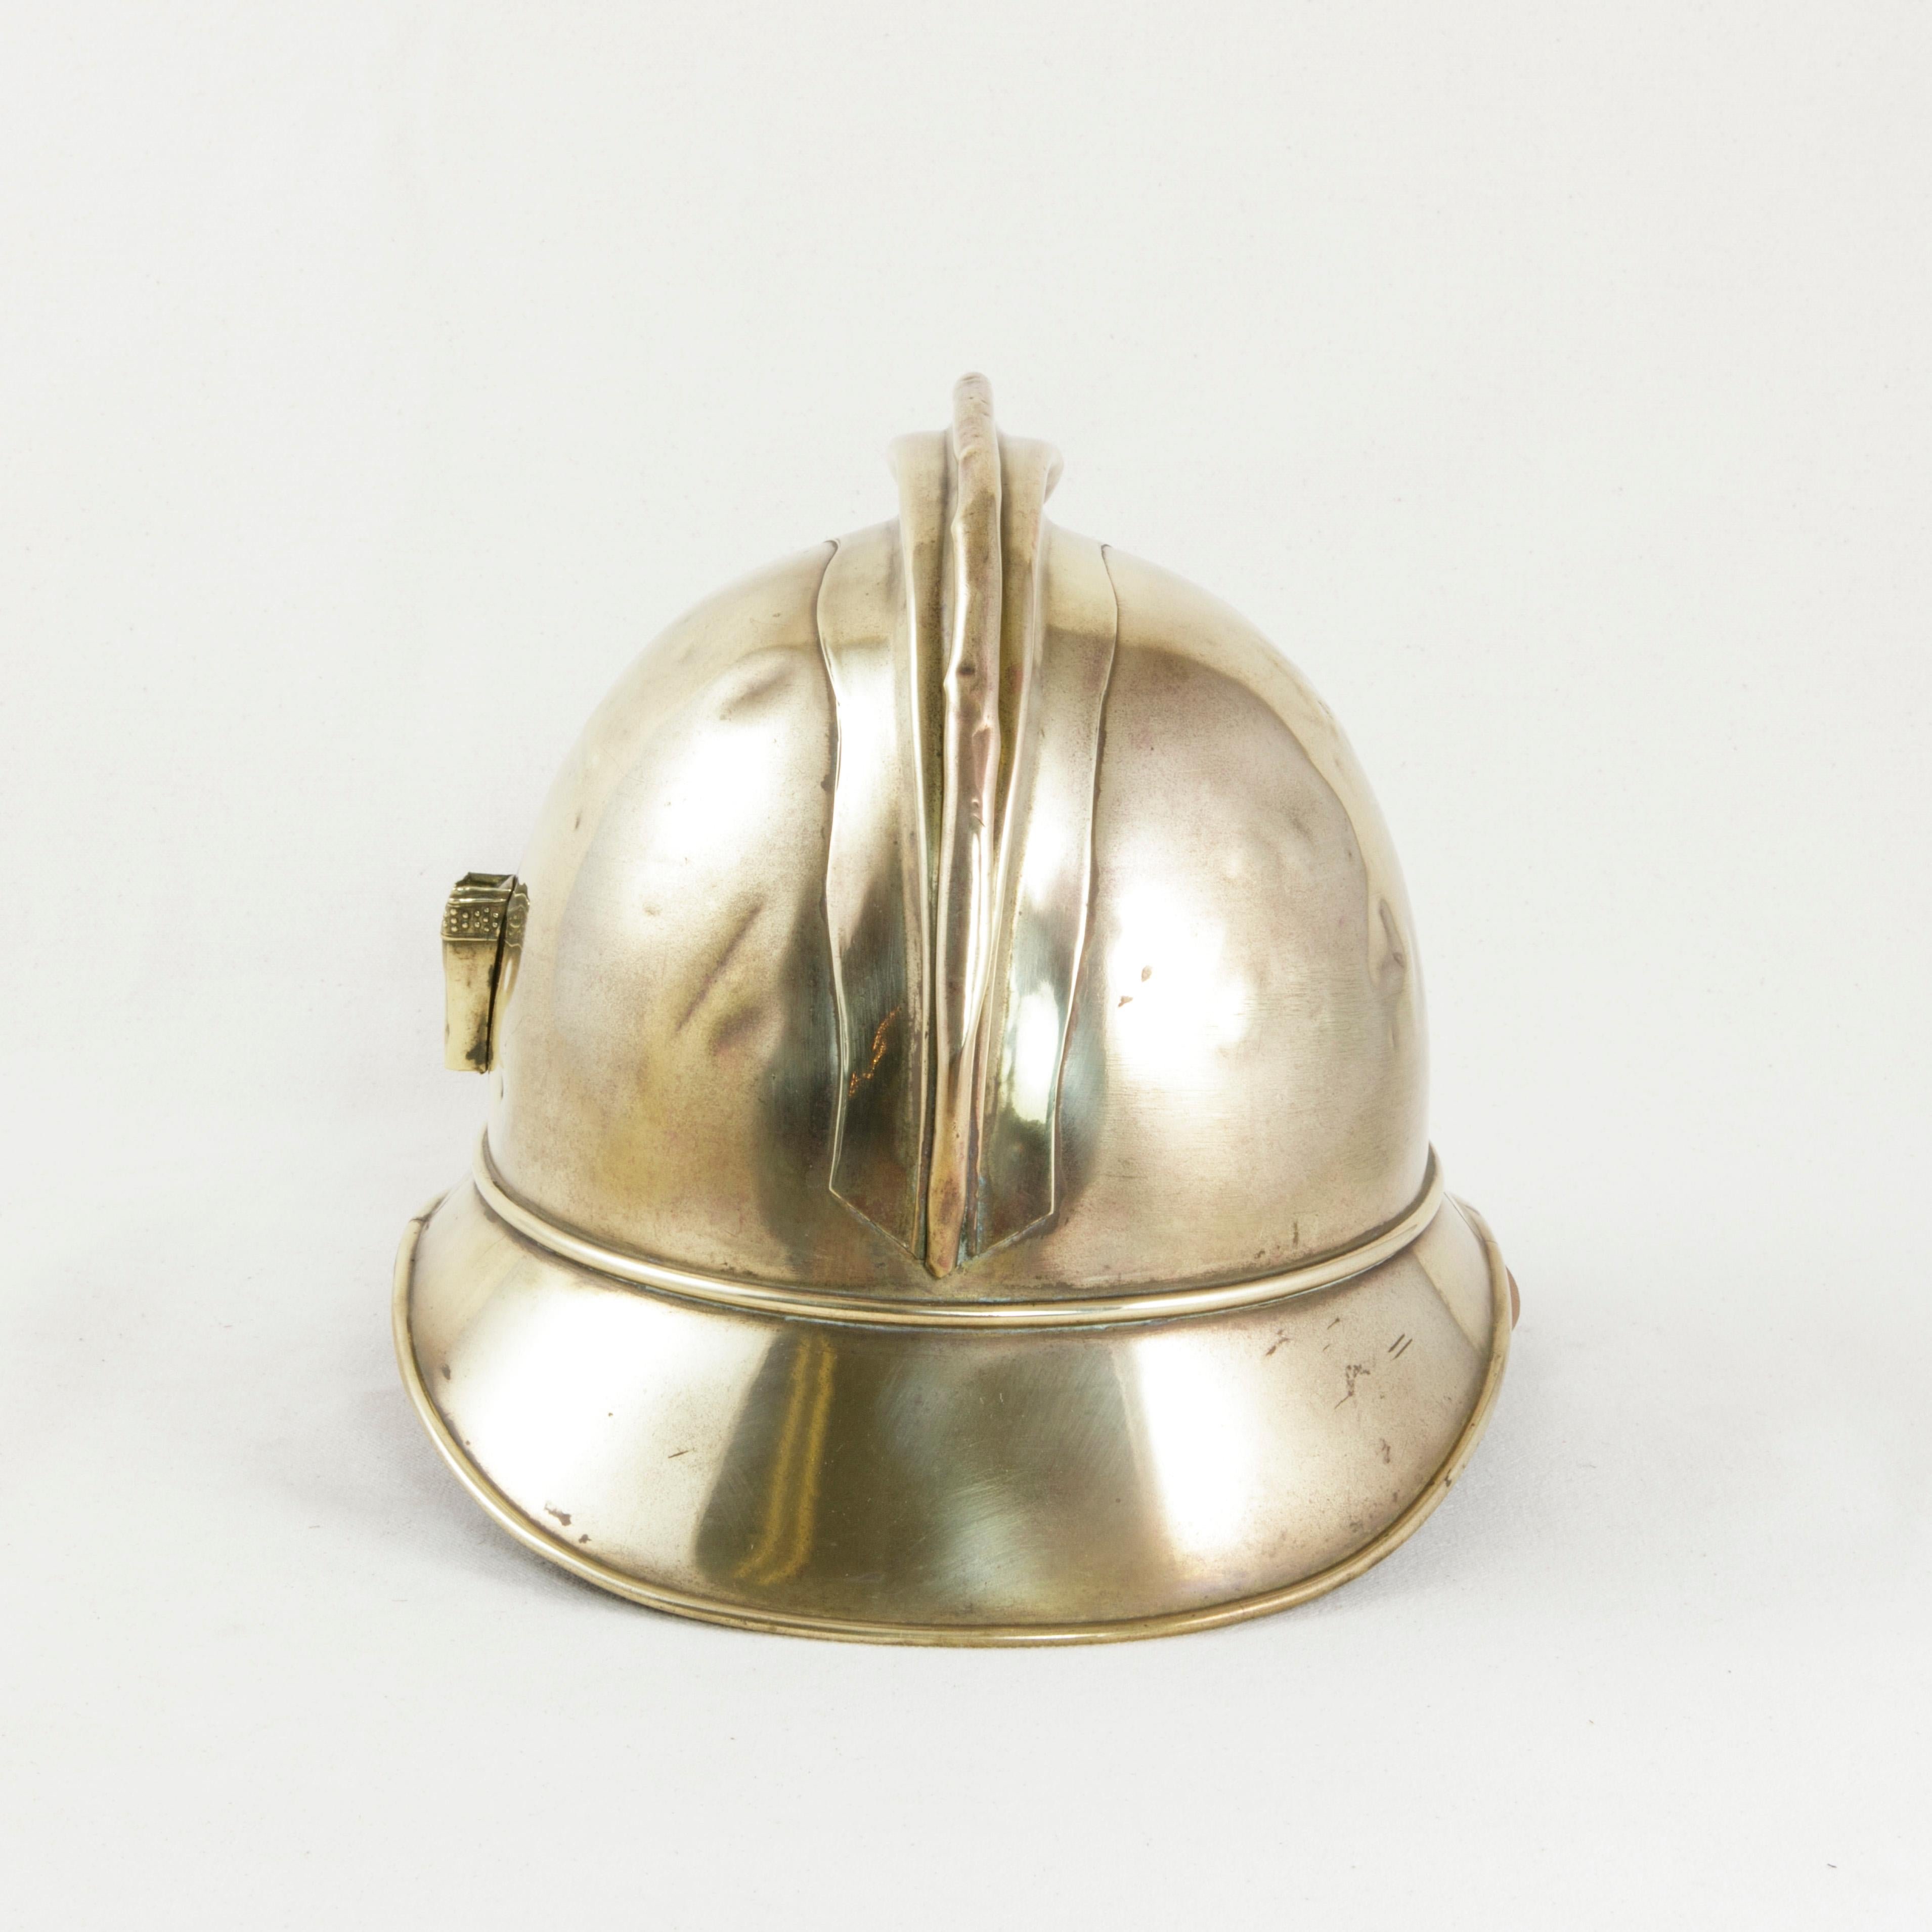 Early 20th Century French Brass Fireman's Helmet with City Seal and Leather Interior, circa 1900